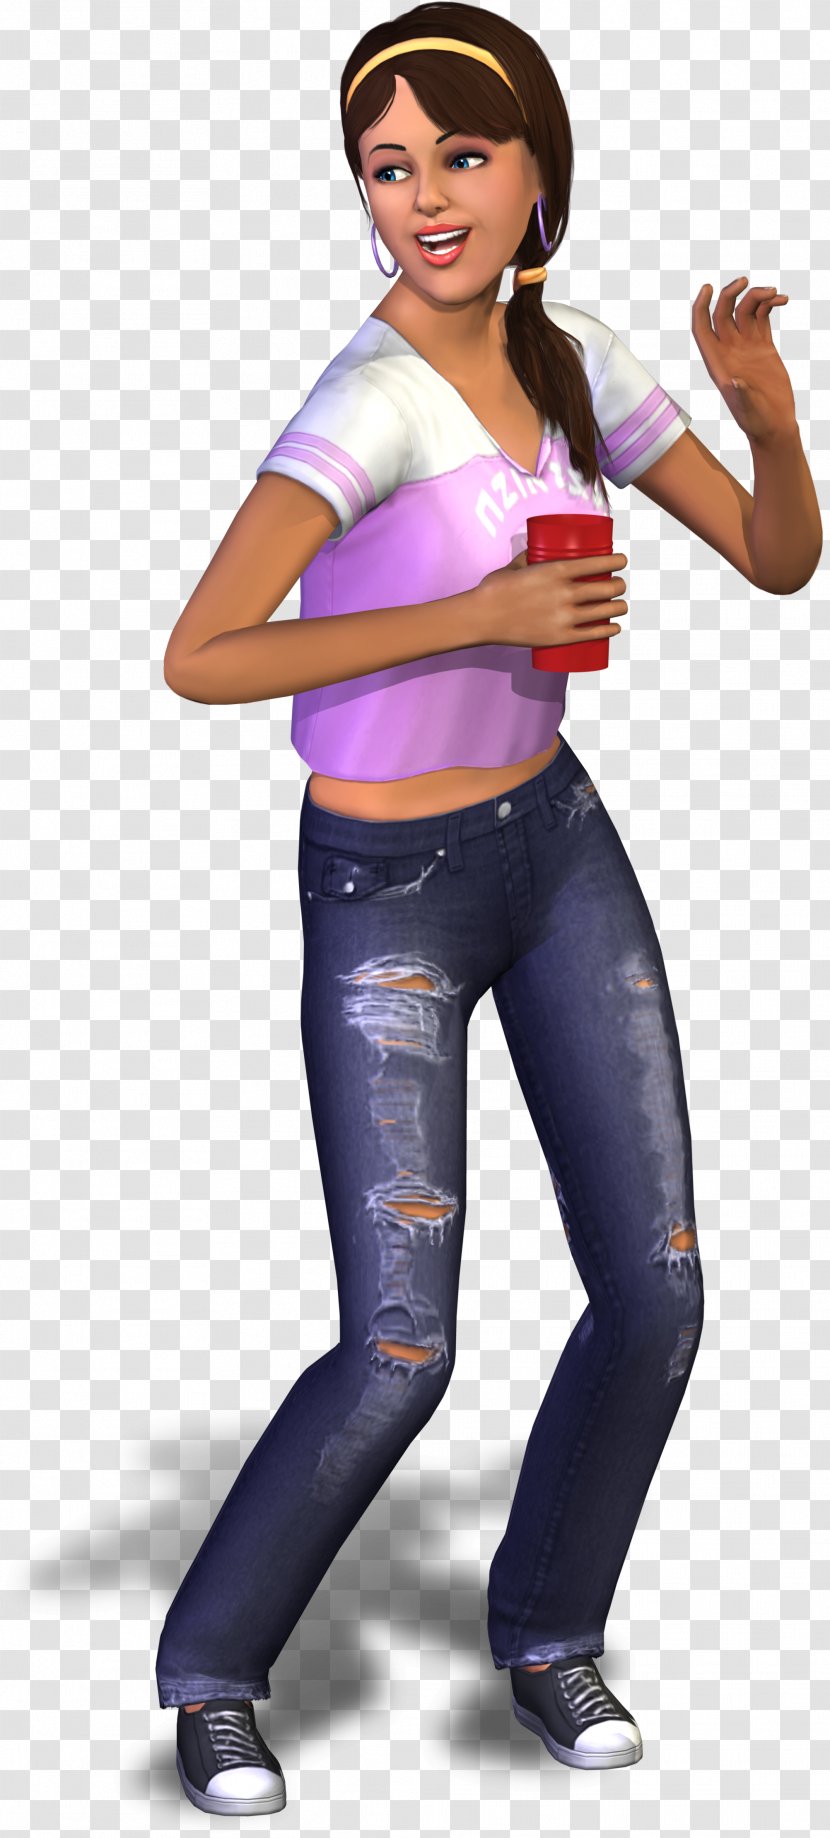 The Sims 3: University Life 2: Apartment Nightlife Seasons - Tree - Workplace Characters Transparent PNG